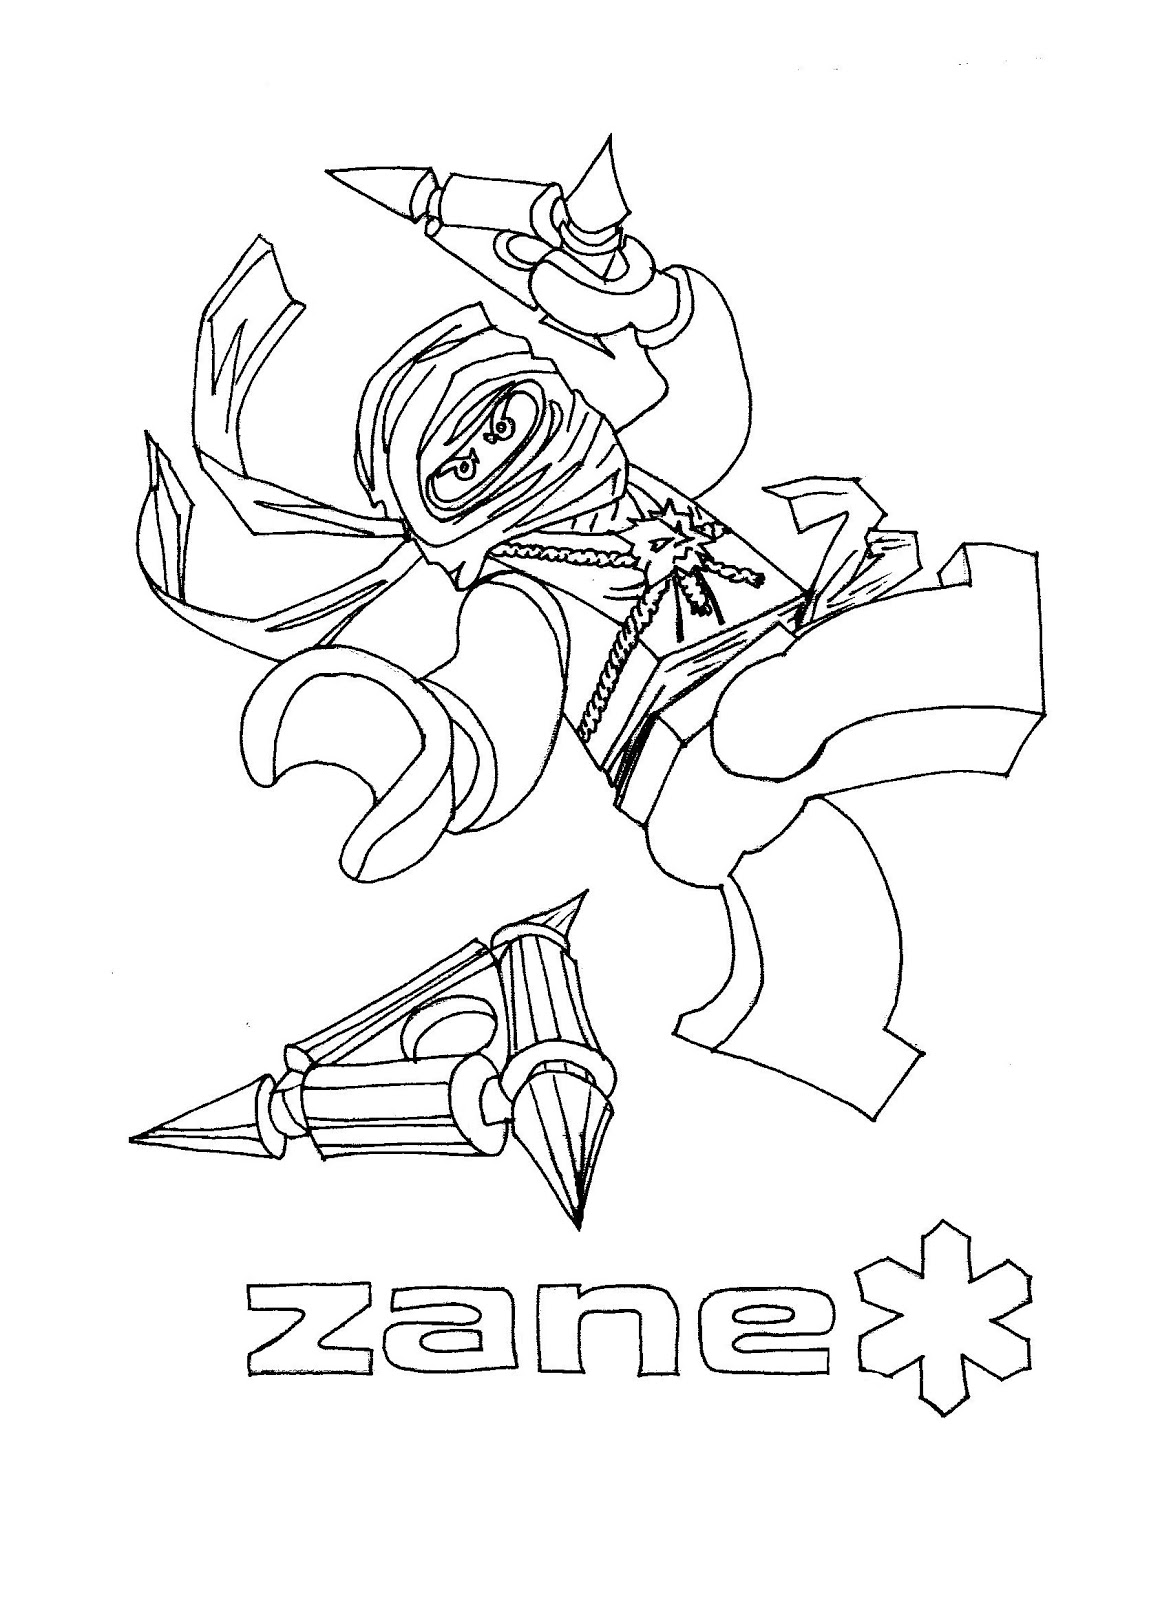 Lego Ninjago Coloring Pages - Lego Ninjago Coloring Pages - Best